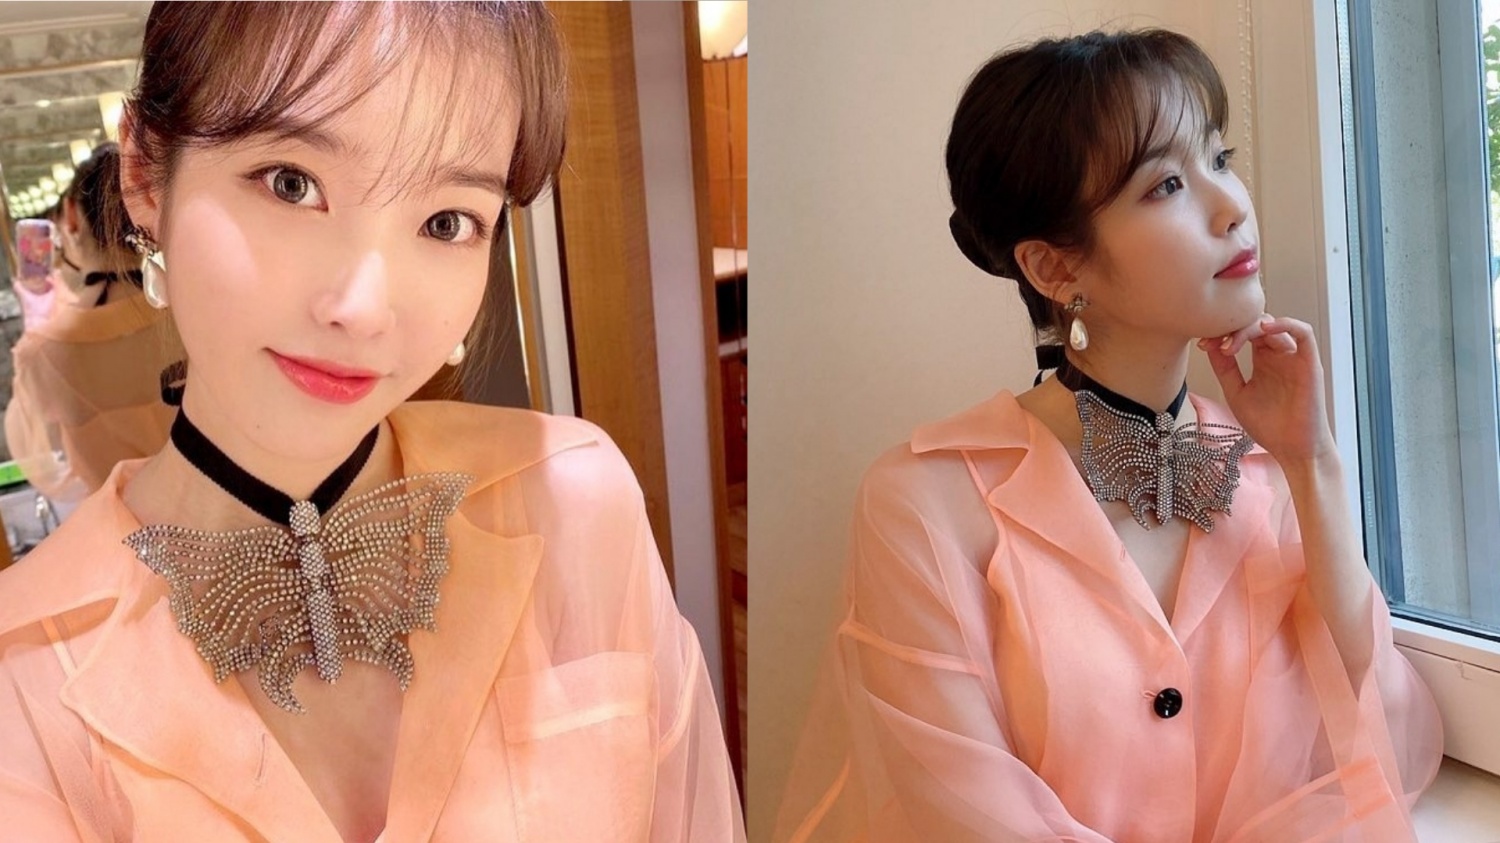 Fans Noticed Something in IU’s Gorgeous Photos: Evidence that She’s the Real-life “Jang Man Wol”